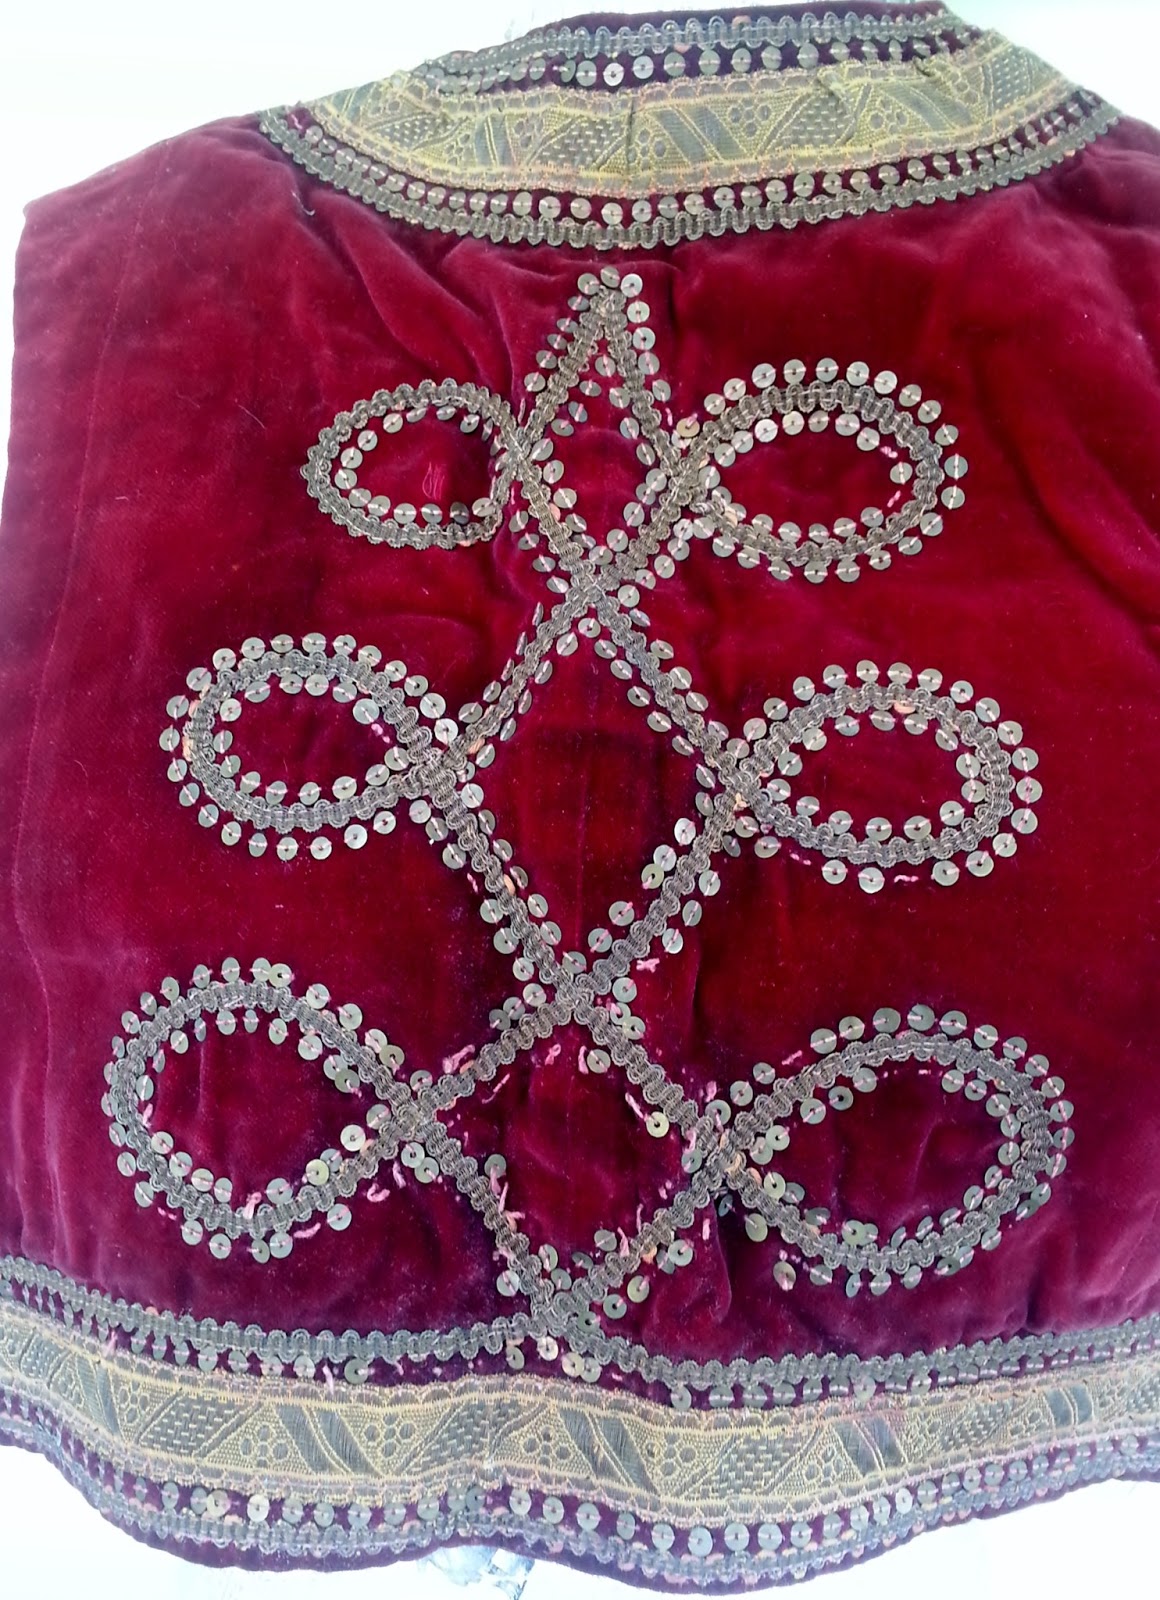 Secondhand Sapphires: My Antique Theatrical Vests